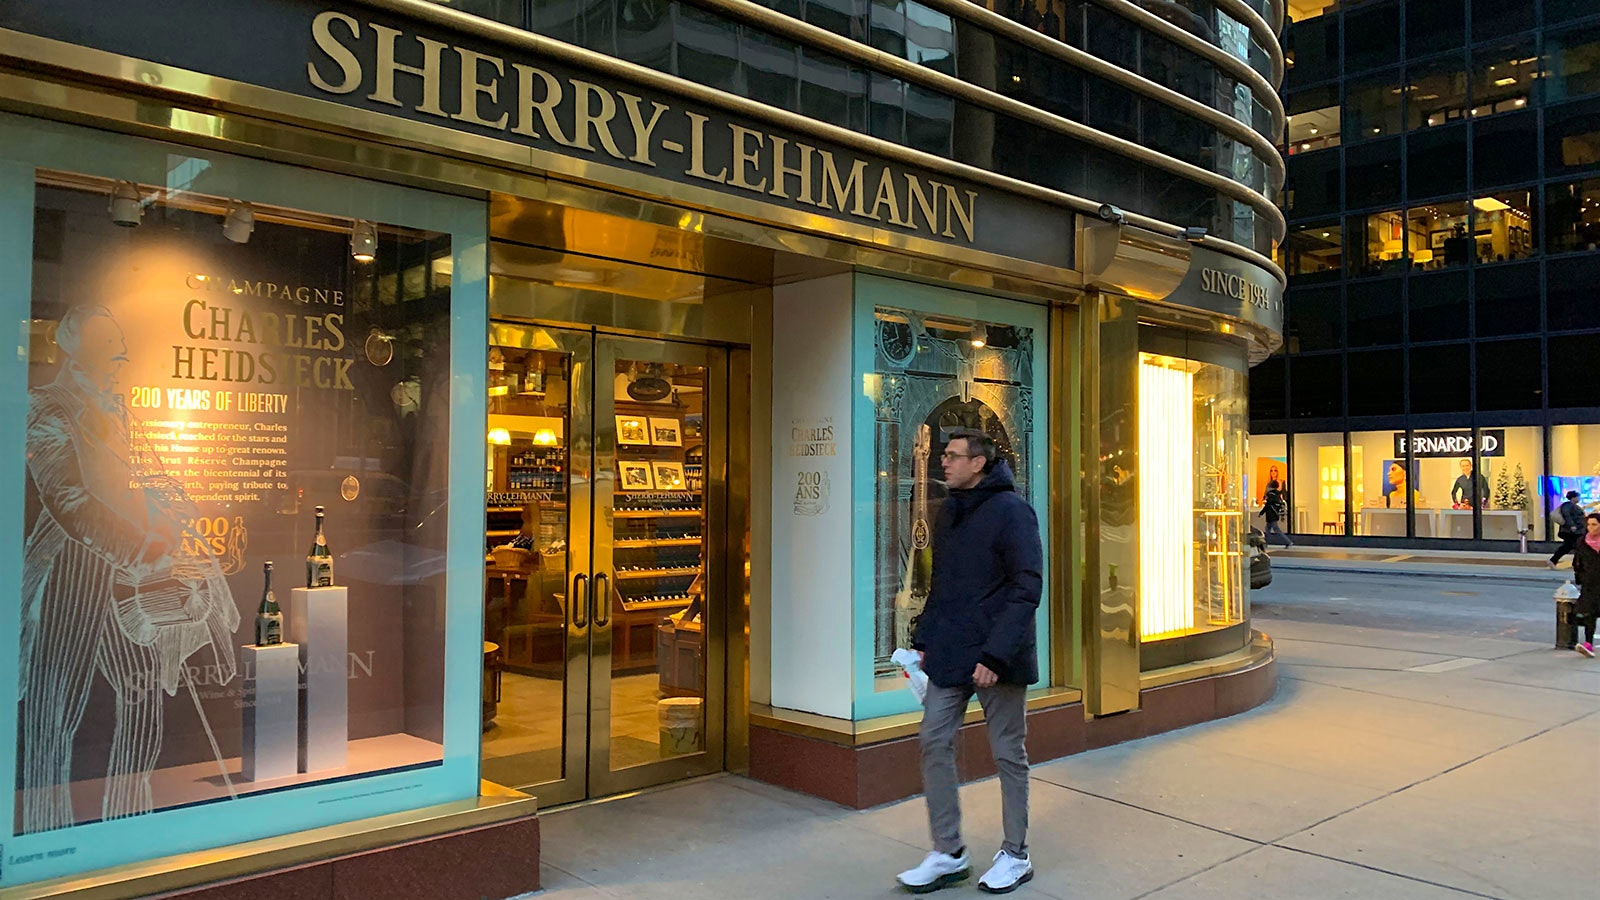  A pedestrian walks by the closed store front of Sherry-Lehmann